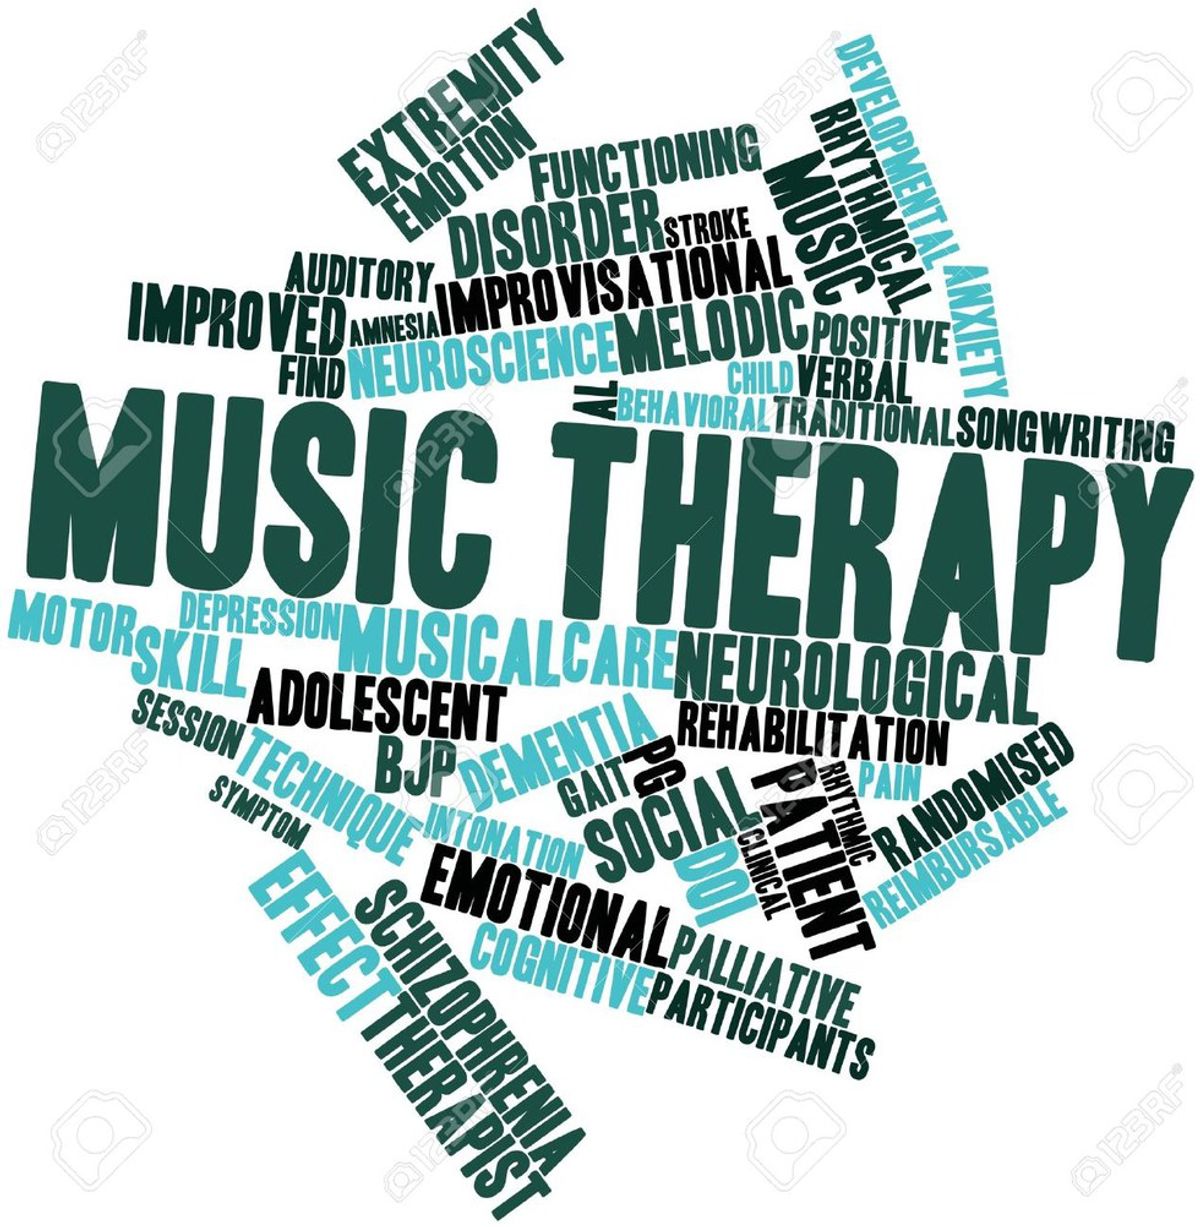 11 Thoughts Of A Music Therapy Major